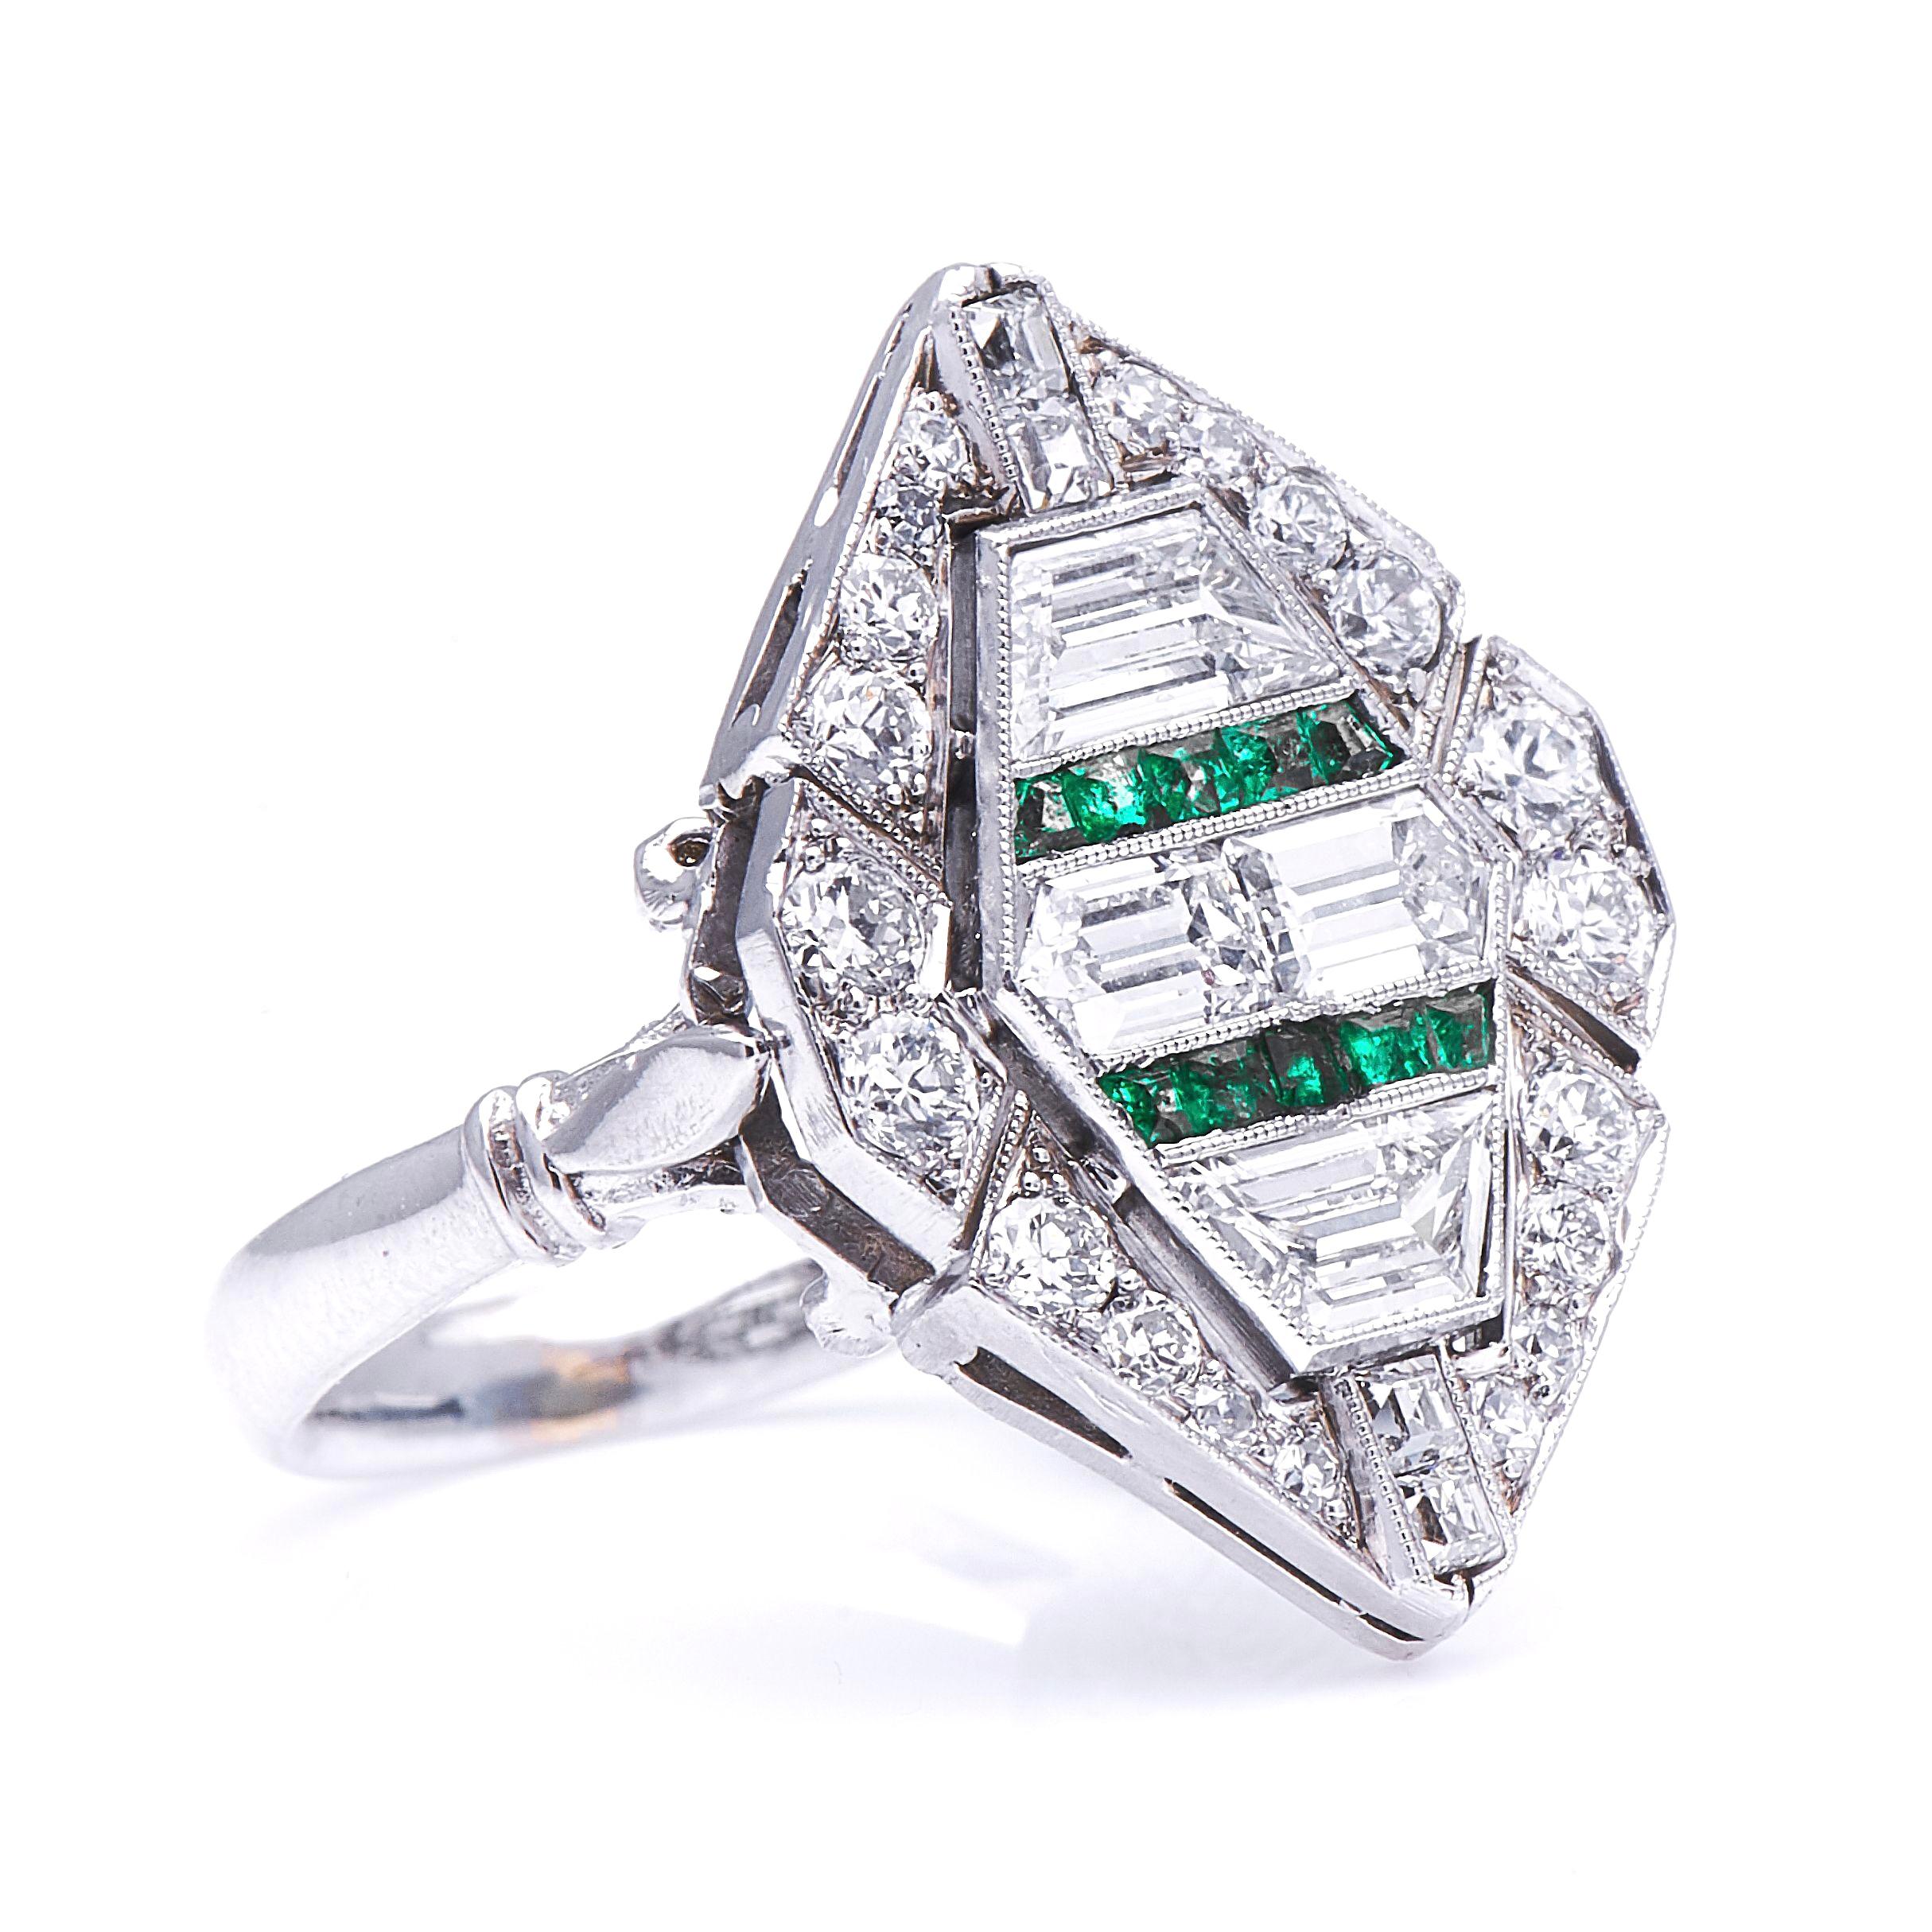 Diamond and emerald ring, 1920s. Around the beginning of the 20thcentury, developments in stone cutting meant that gemstones and diamonds could be shaped in more diverse ways than ever before. The different arrangements of these new shapes, such as